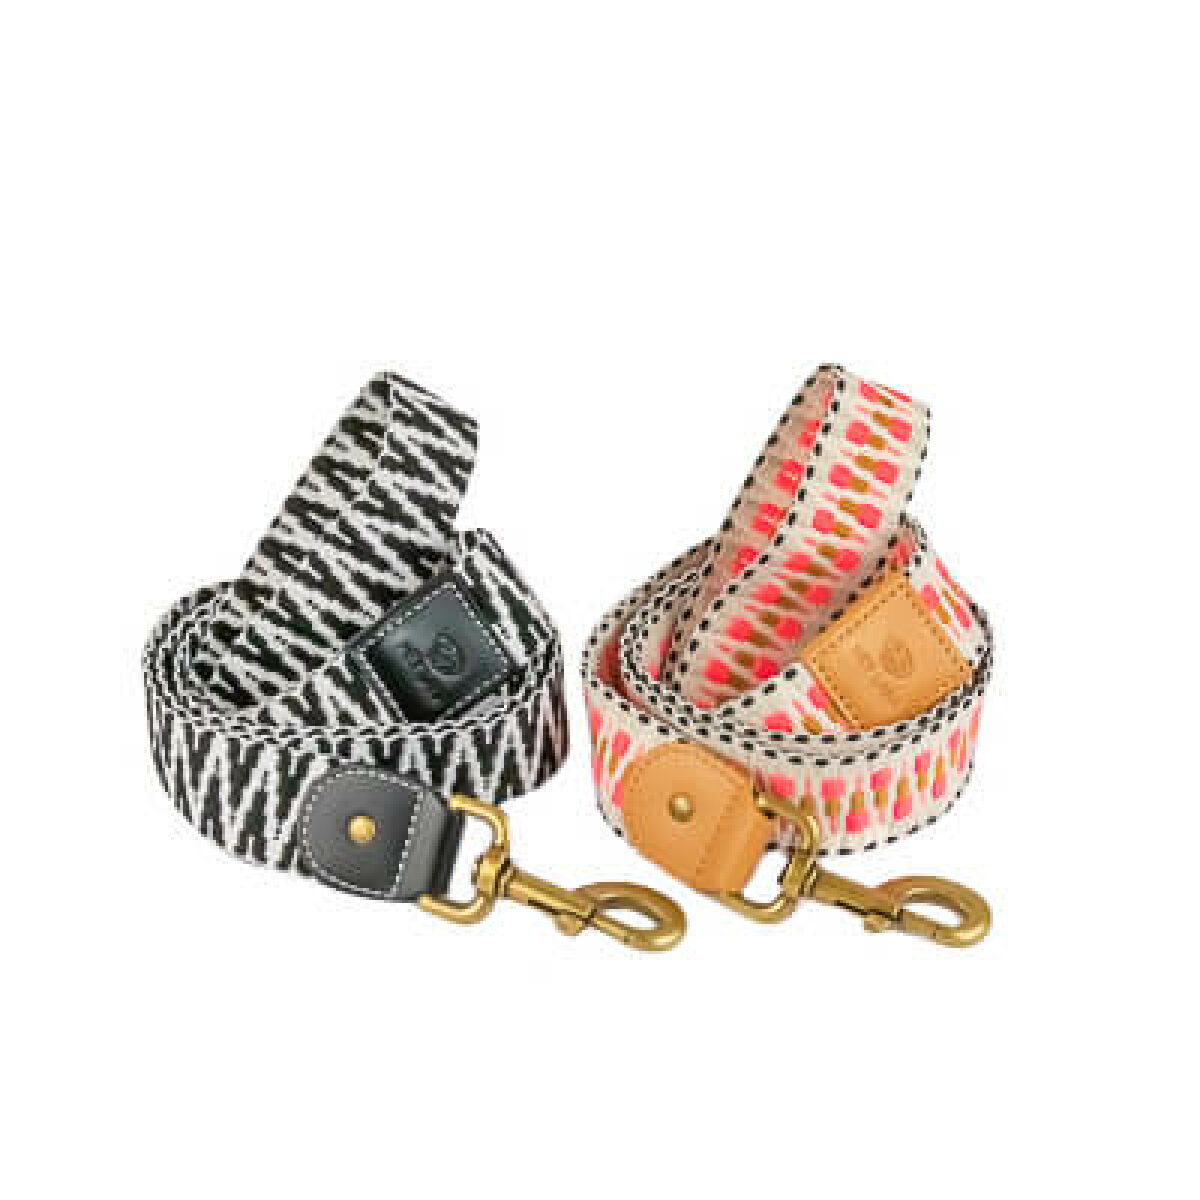 Short dog leads Tres Chic 1.20m in black/white and pink/beige